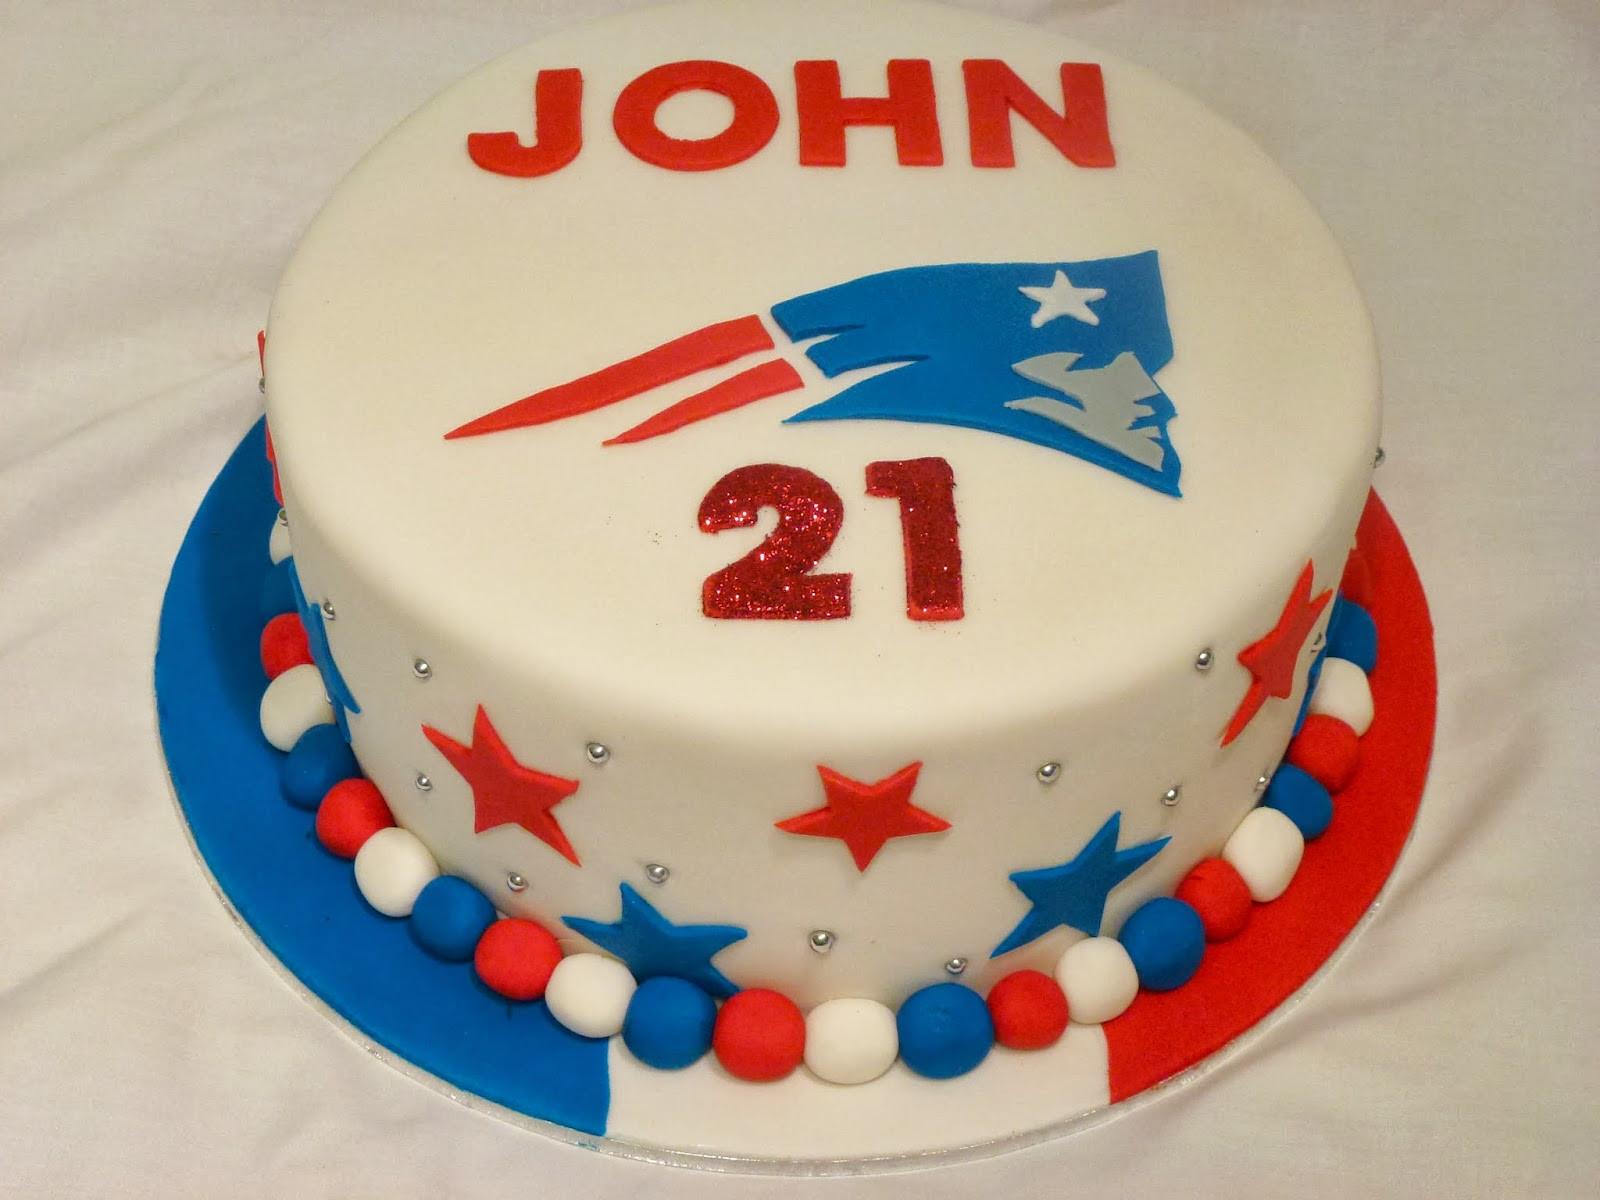 New England Patriots Birthday Cake
 Cakes and Other Delights New England Patriots Happy